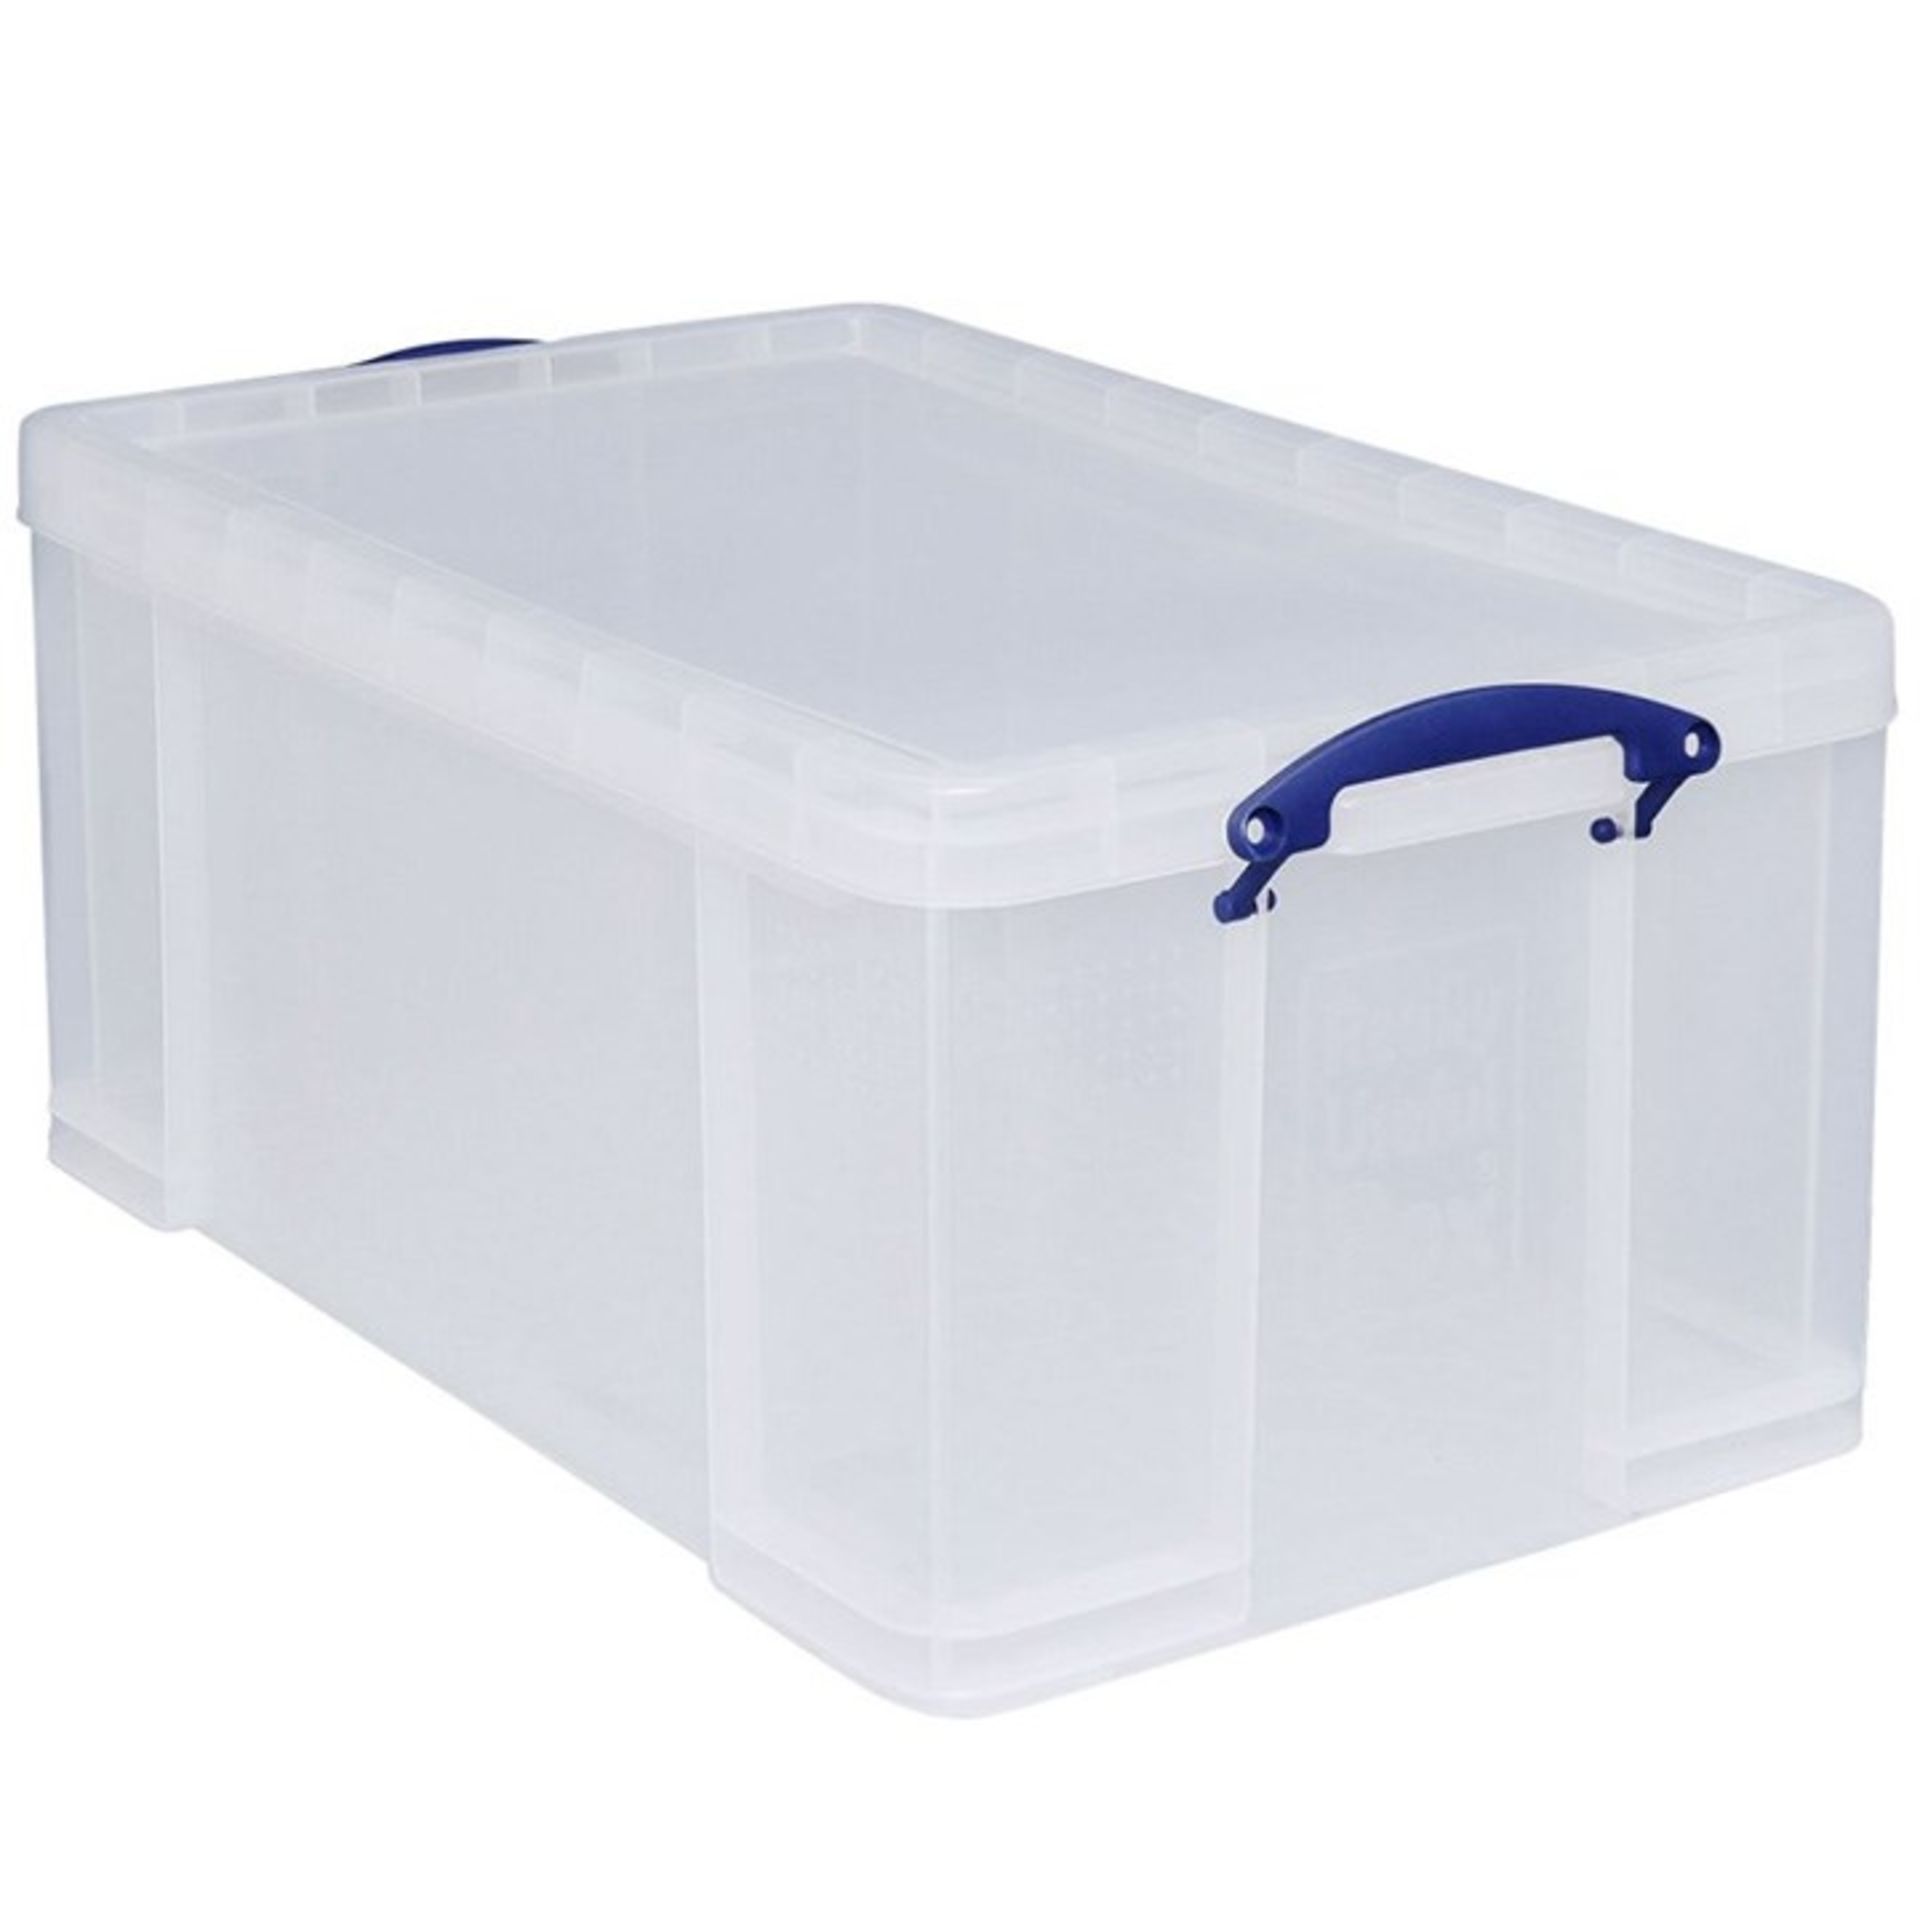 5 x Really Useful 64L Clear Plastic Stackable Storage Boxes - CL327 - Very Good Condition -